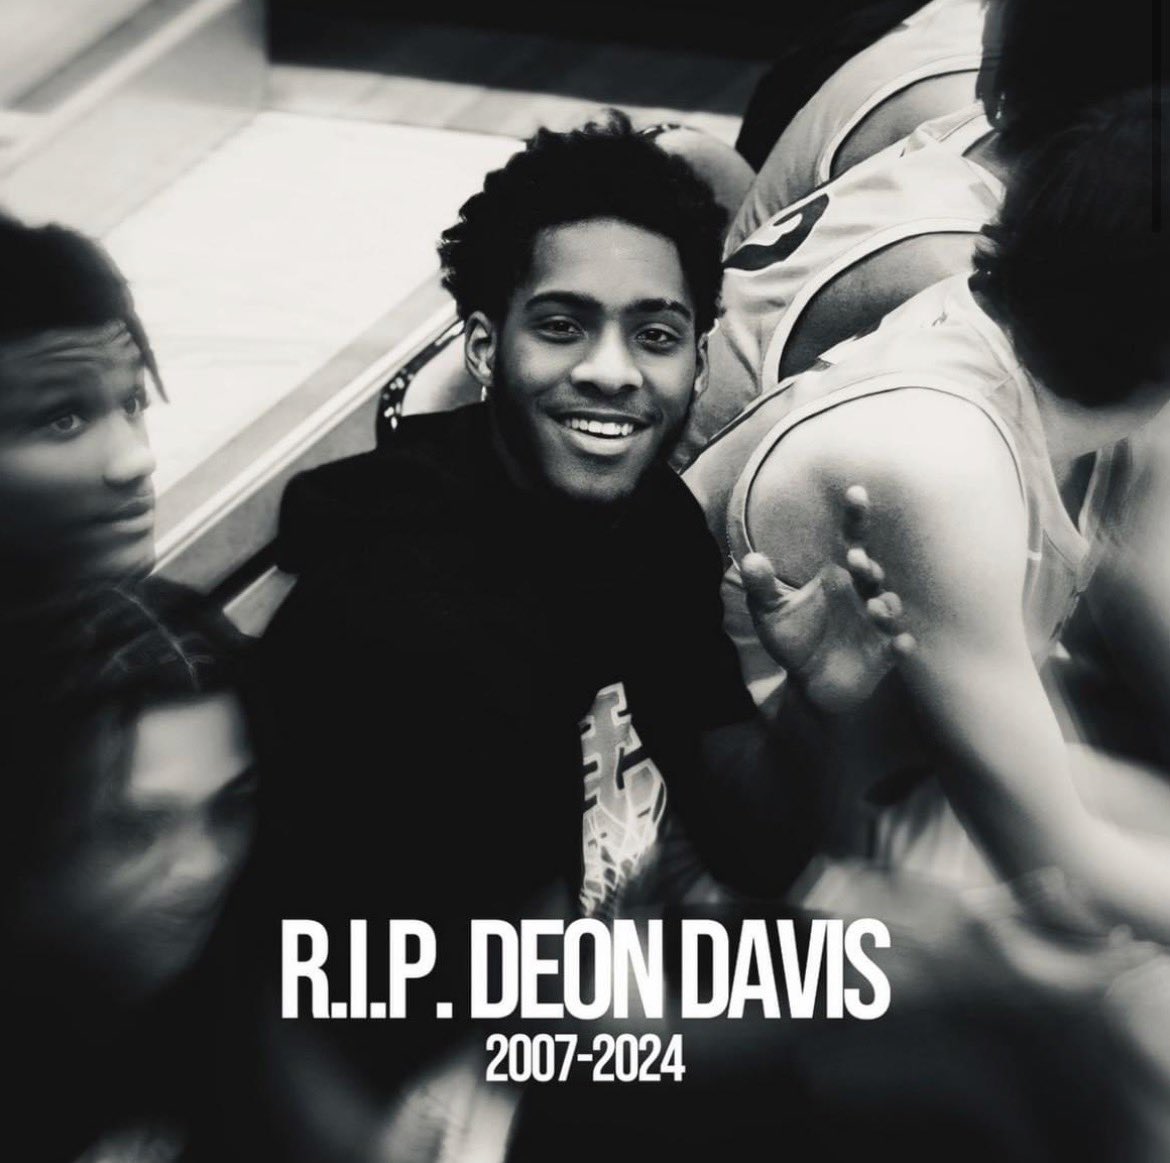 The Sayre Basketball program was sorry to hear about the passing of @HCBluedevilsMBB Deon Davis! Our thoughts and prayers go out to the entire Henry Clay community and Davis family!